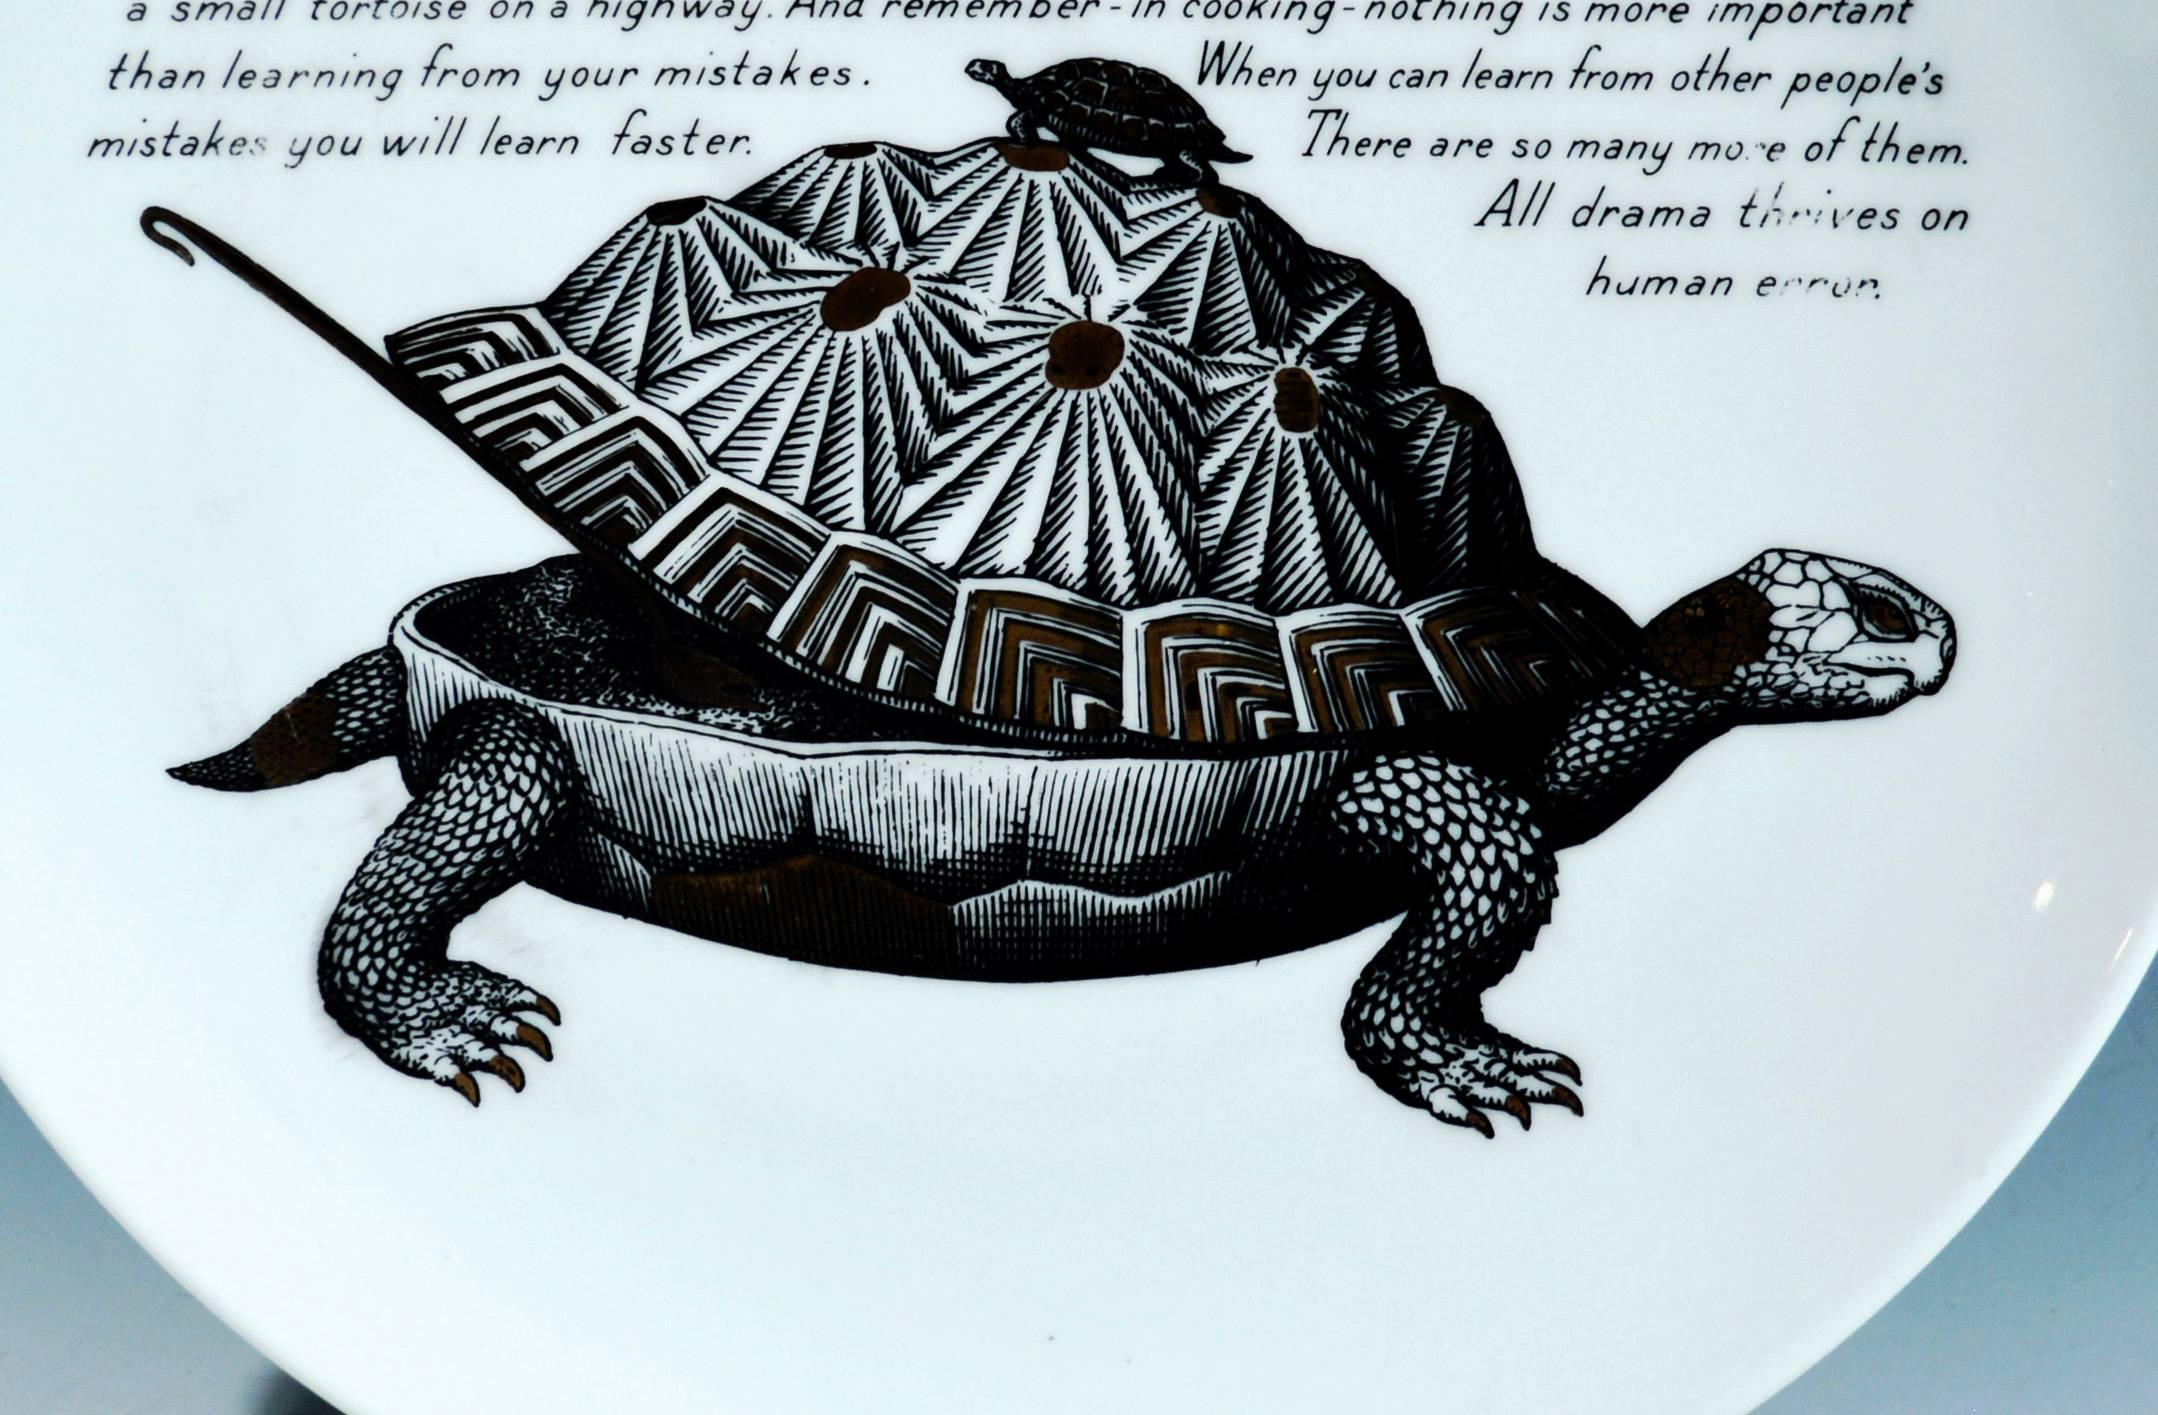 Piero Fornasetti Fleming Joffe recipe plate,
Tortoise Risotto, 
1960s.

This rare Piero Fornasetti plate is from a series of 14 made for the Fleming Joffe company in New York City. I have handled this series for many years and the Tortoise